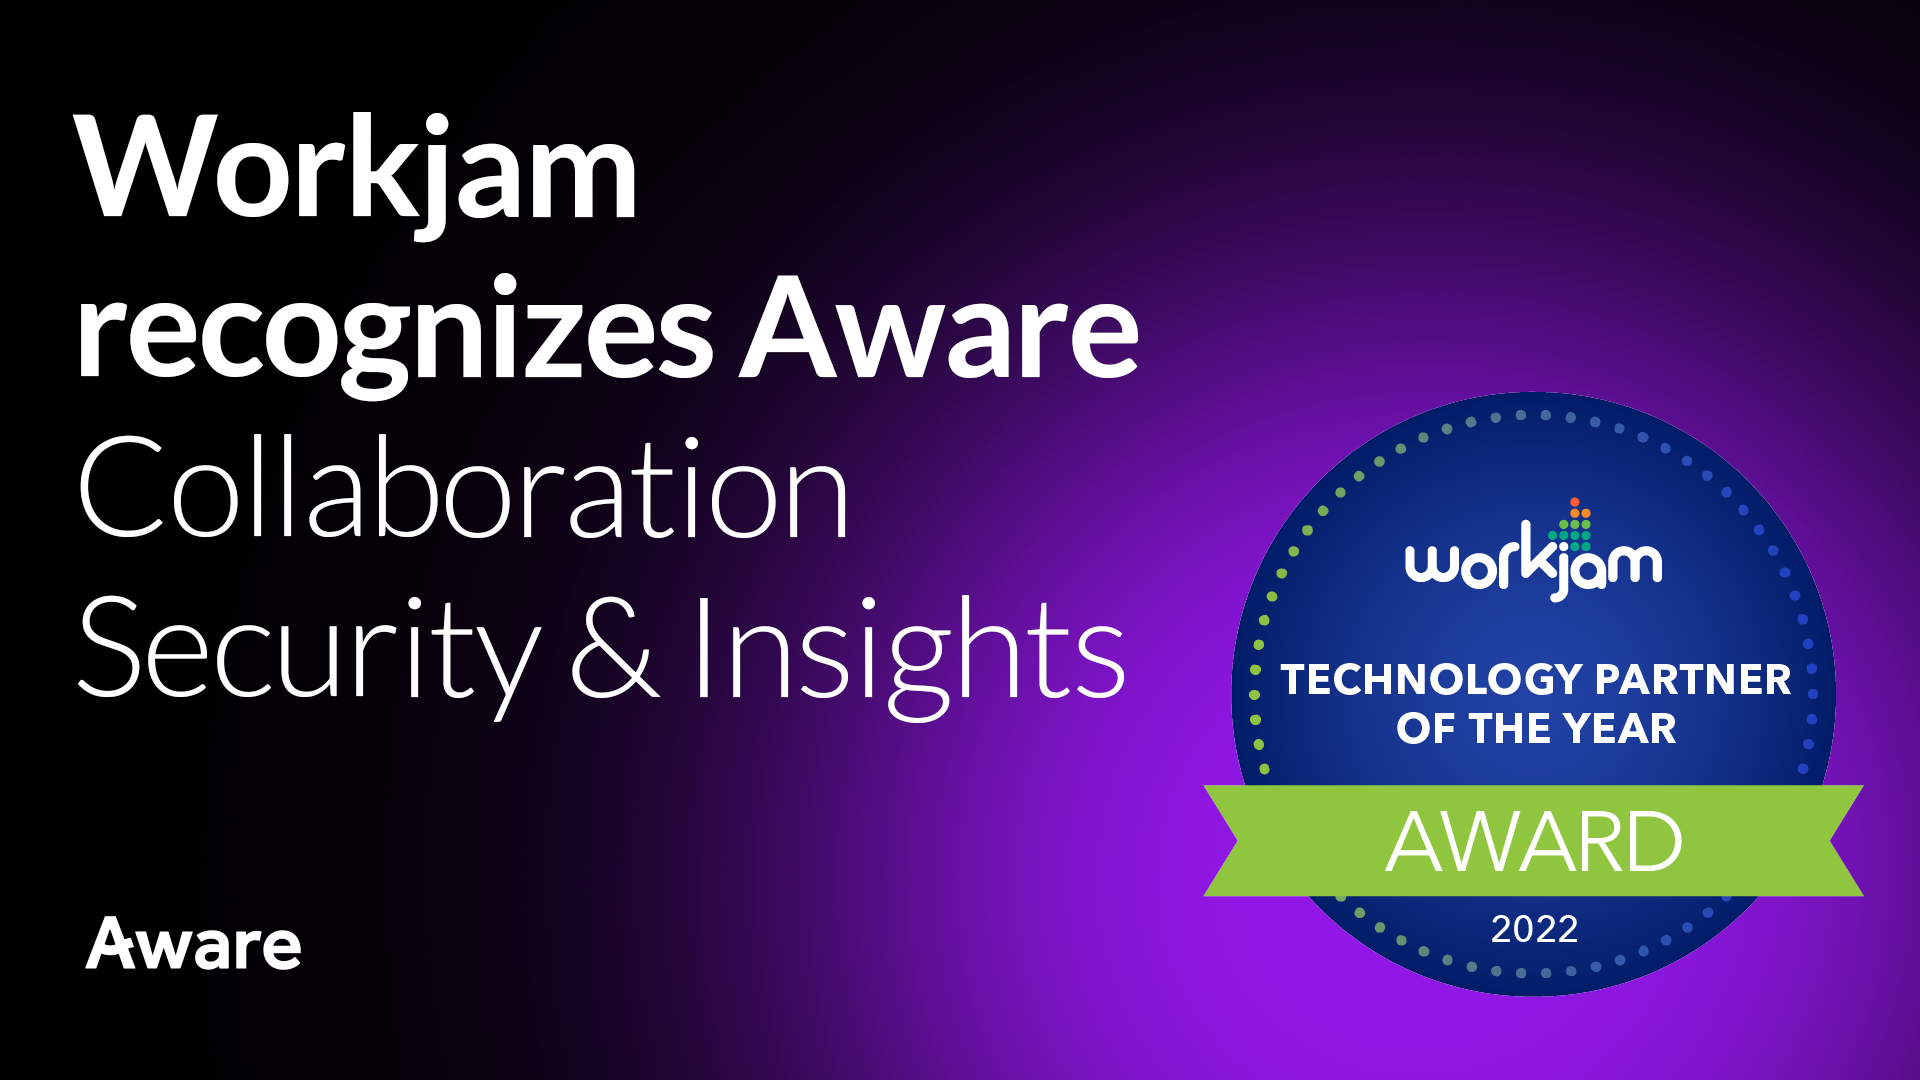 Award Named WorkJam Technology Partner of the Year at Inaugural Jammy Awards